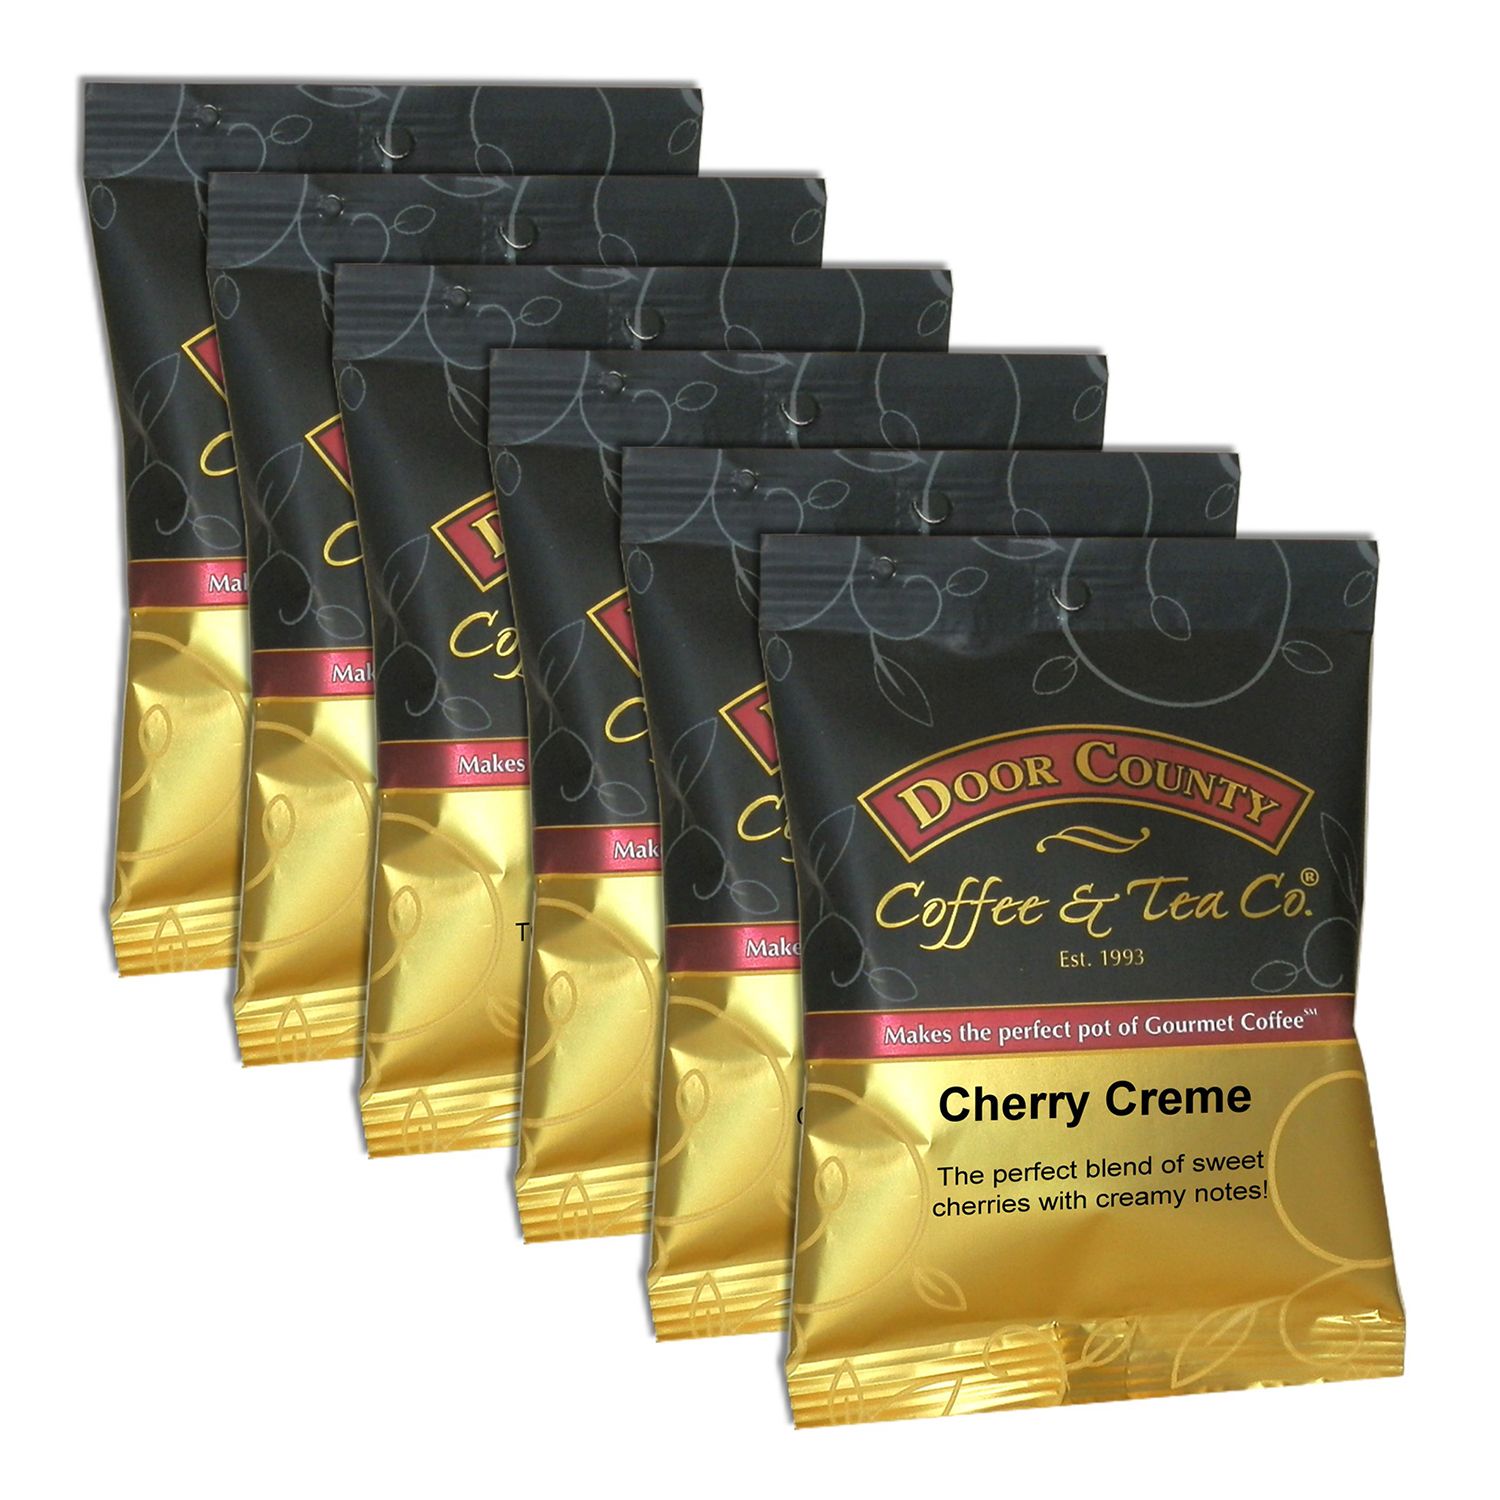 Image for Door County Coffee & Tea Co. Cherry Crème Ground Coffee 6-pk. at Kohl's.